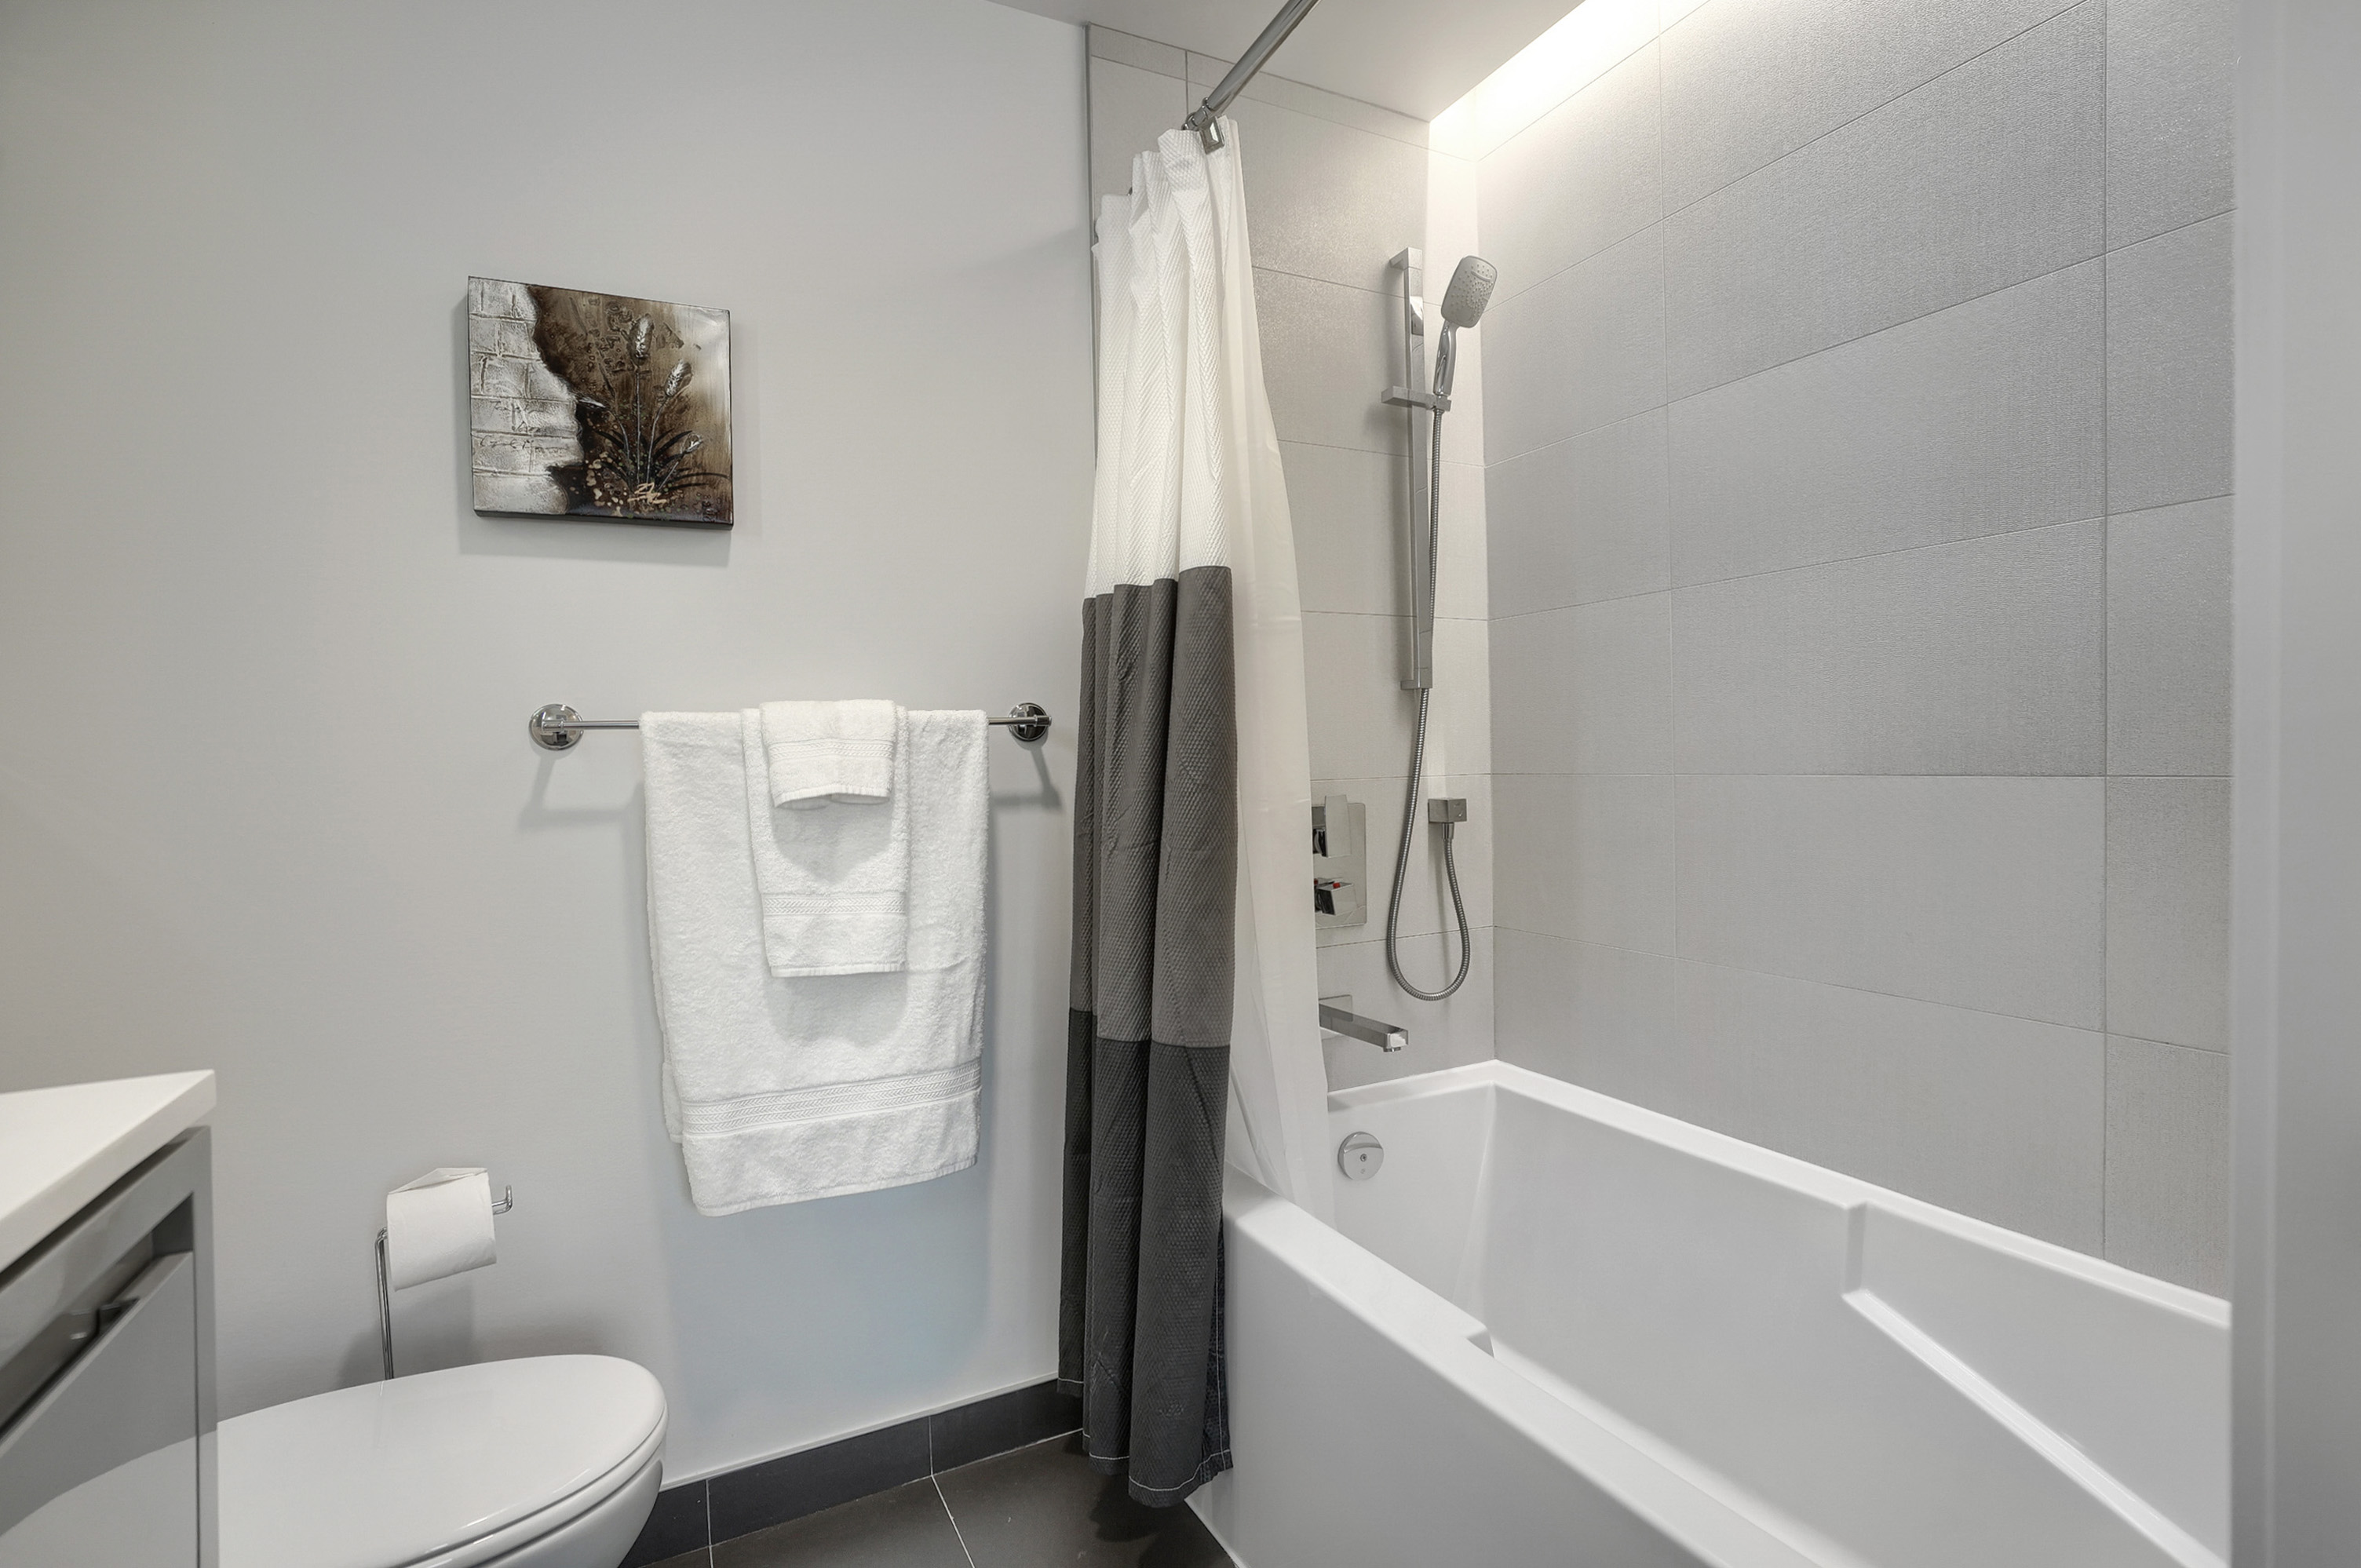 Angled view of the modern bathroom in this luxury furnished short term housing apartment in montreal. Modern white tube with squared edges, adjustable shower head, white plush towels. White and gray accents throughout 